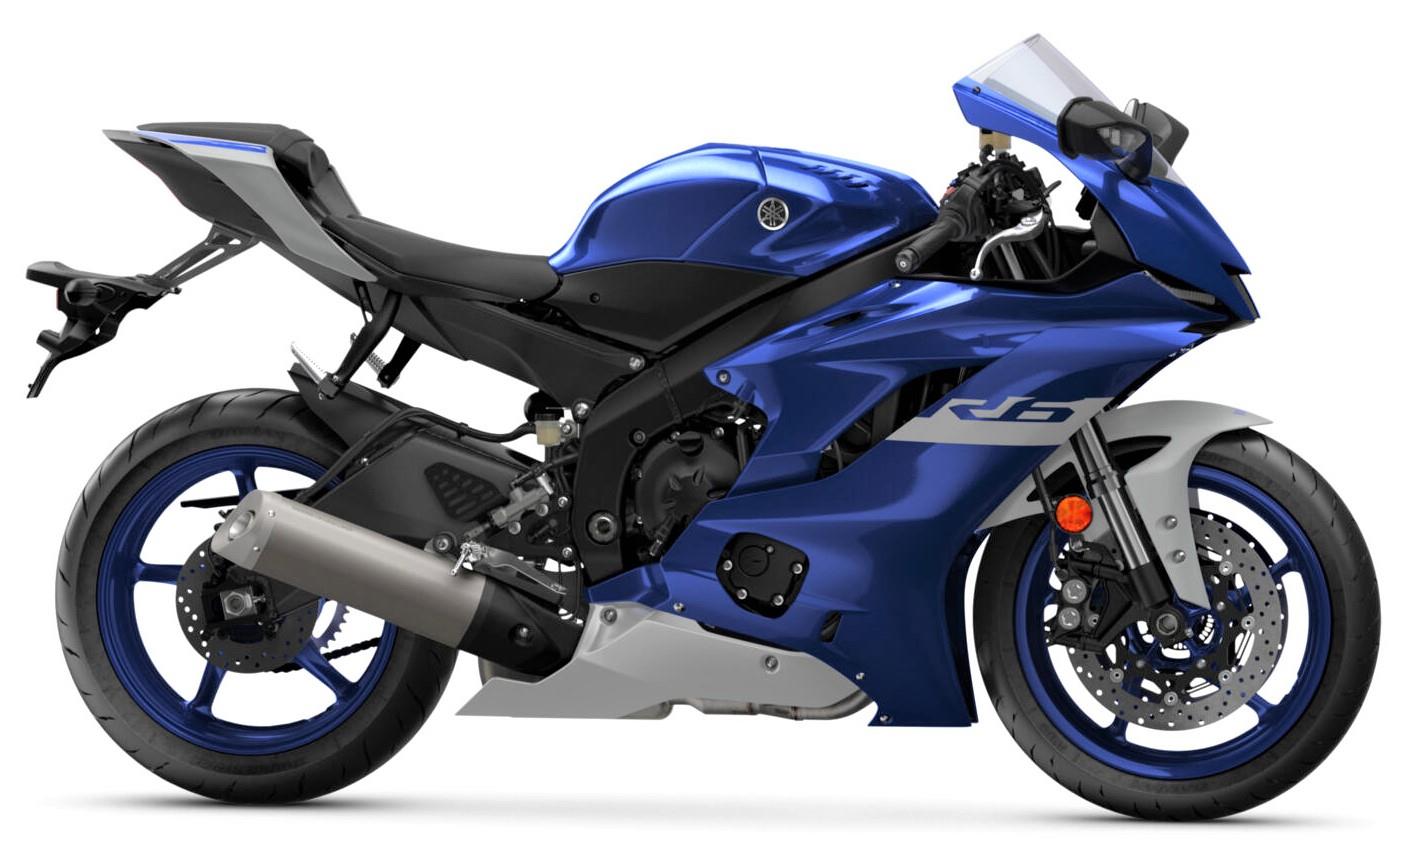 2020 Yamaha Yzf R6 Price Specs Top Speed Mileage In India